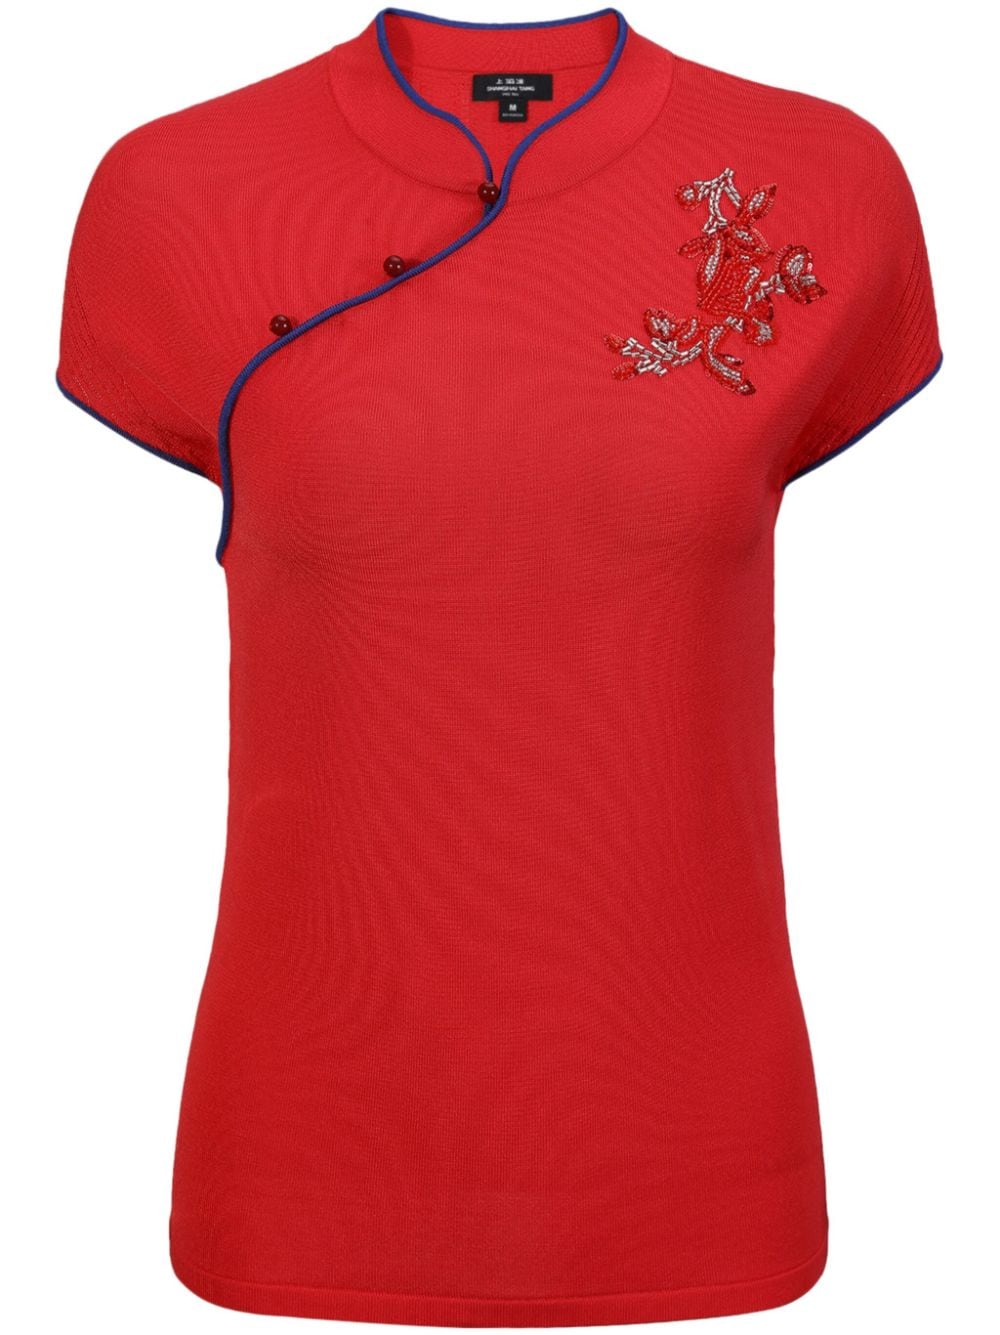 Shanghai Tang Hollyhock floral-embroidered top von Shanghai Tang